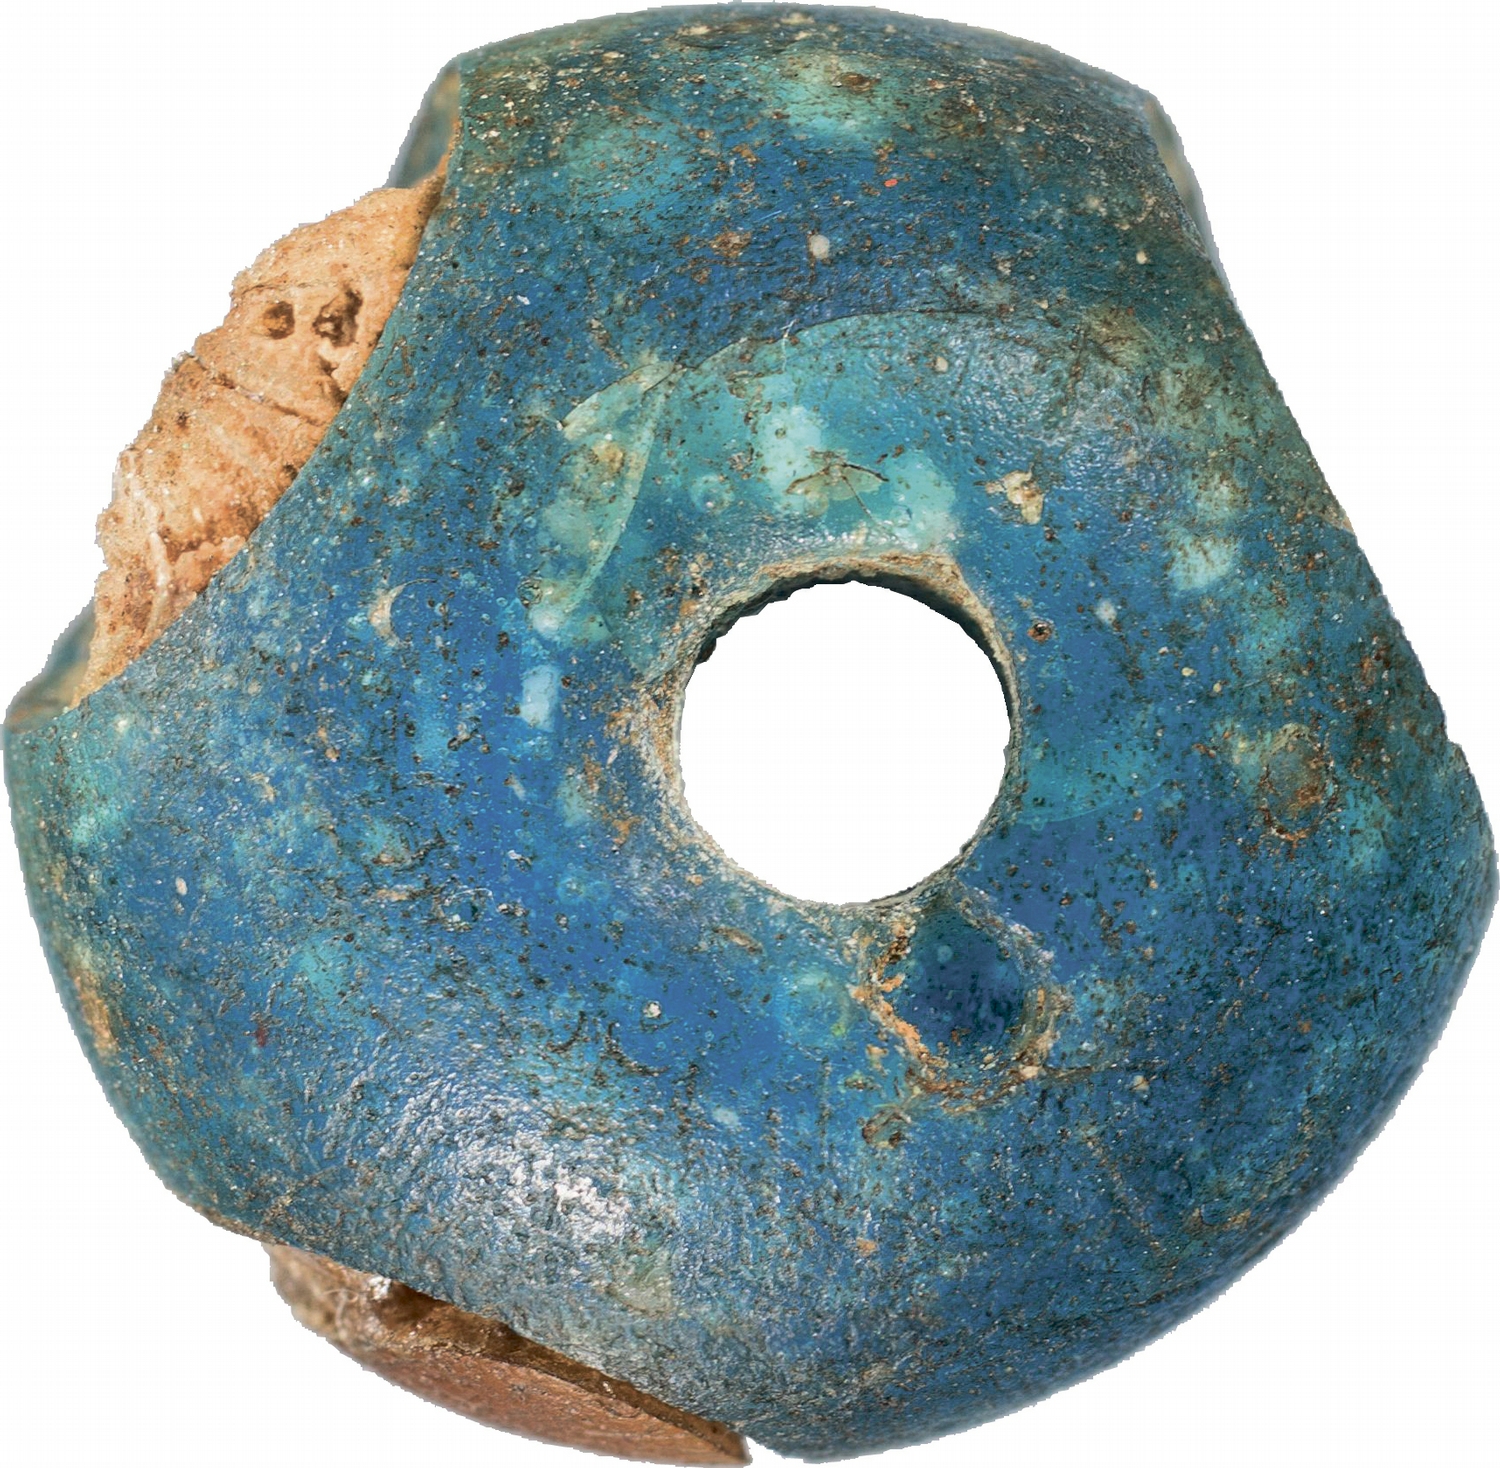 Egyptian Glass Beads Found In Bronze Age Danish Burials The History Blog